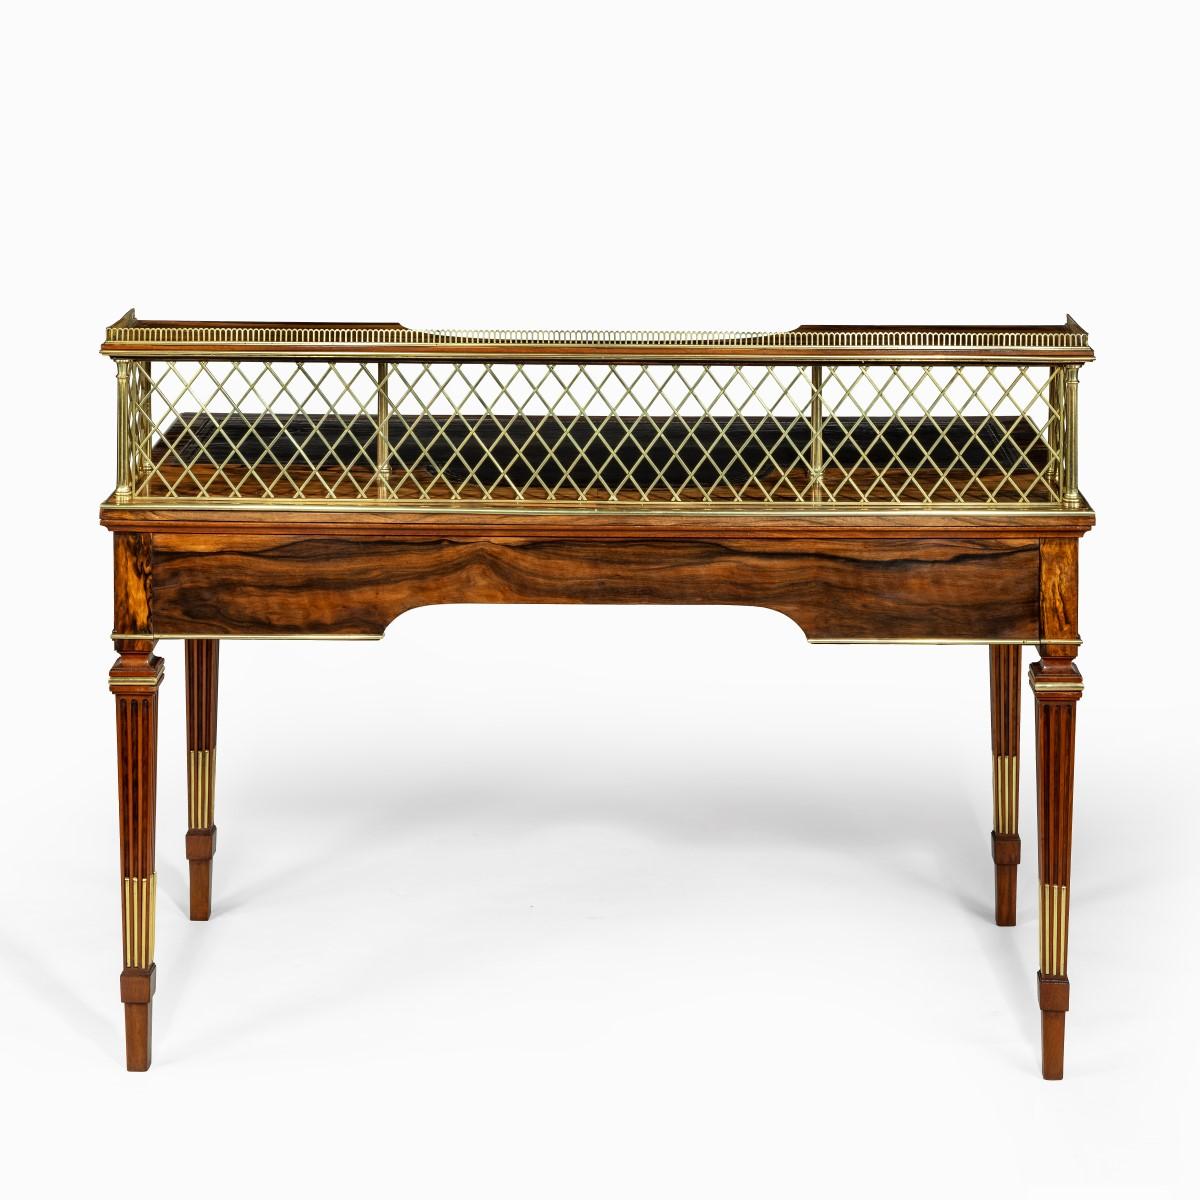 An olivewood writing table by Wright and Mansfield